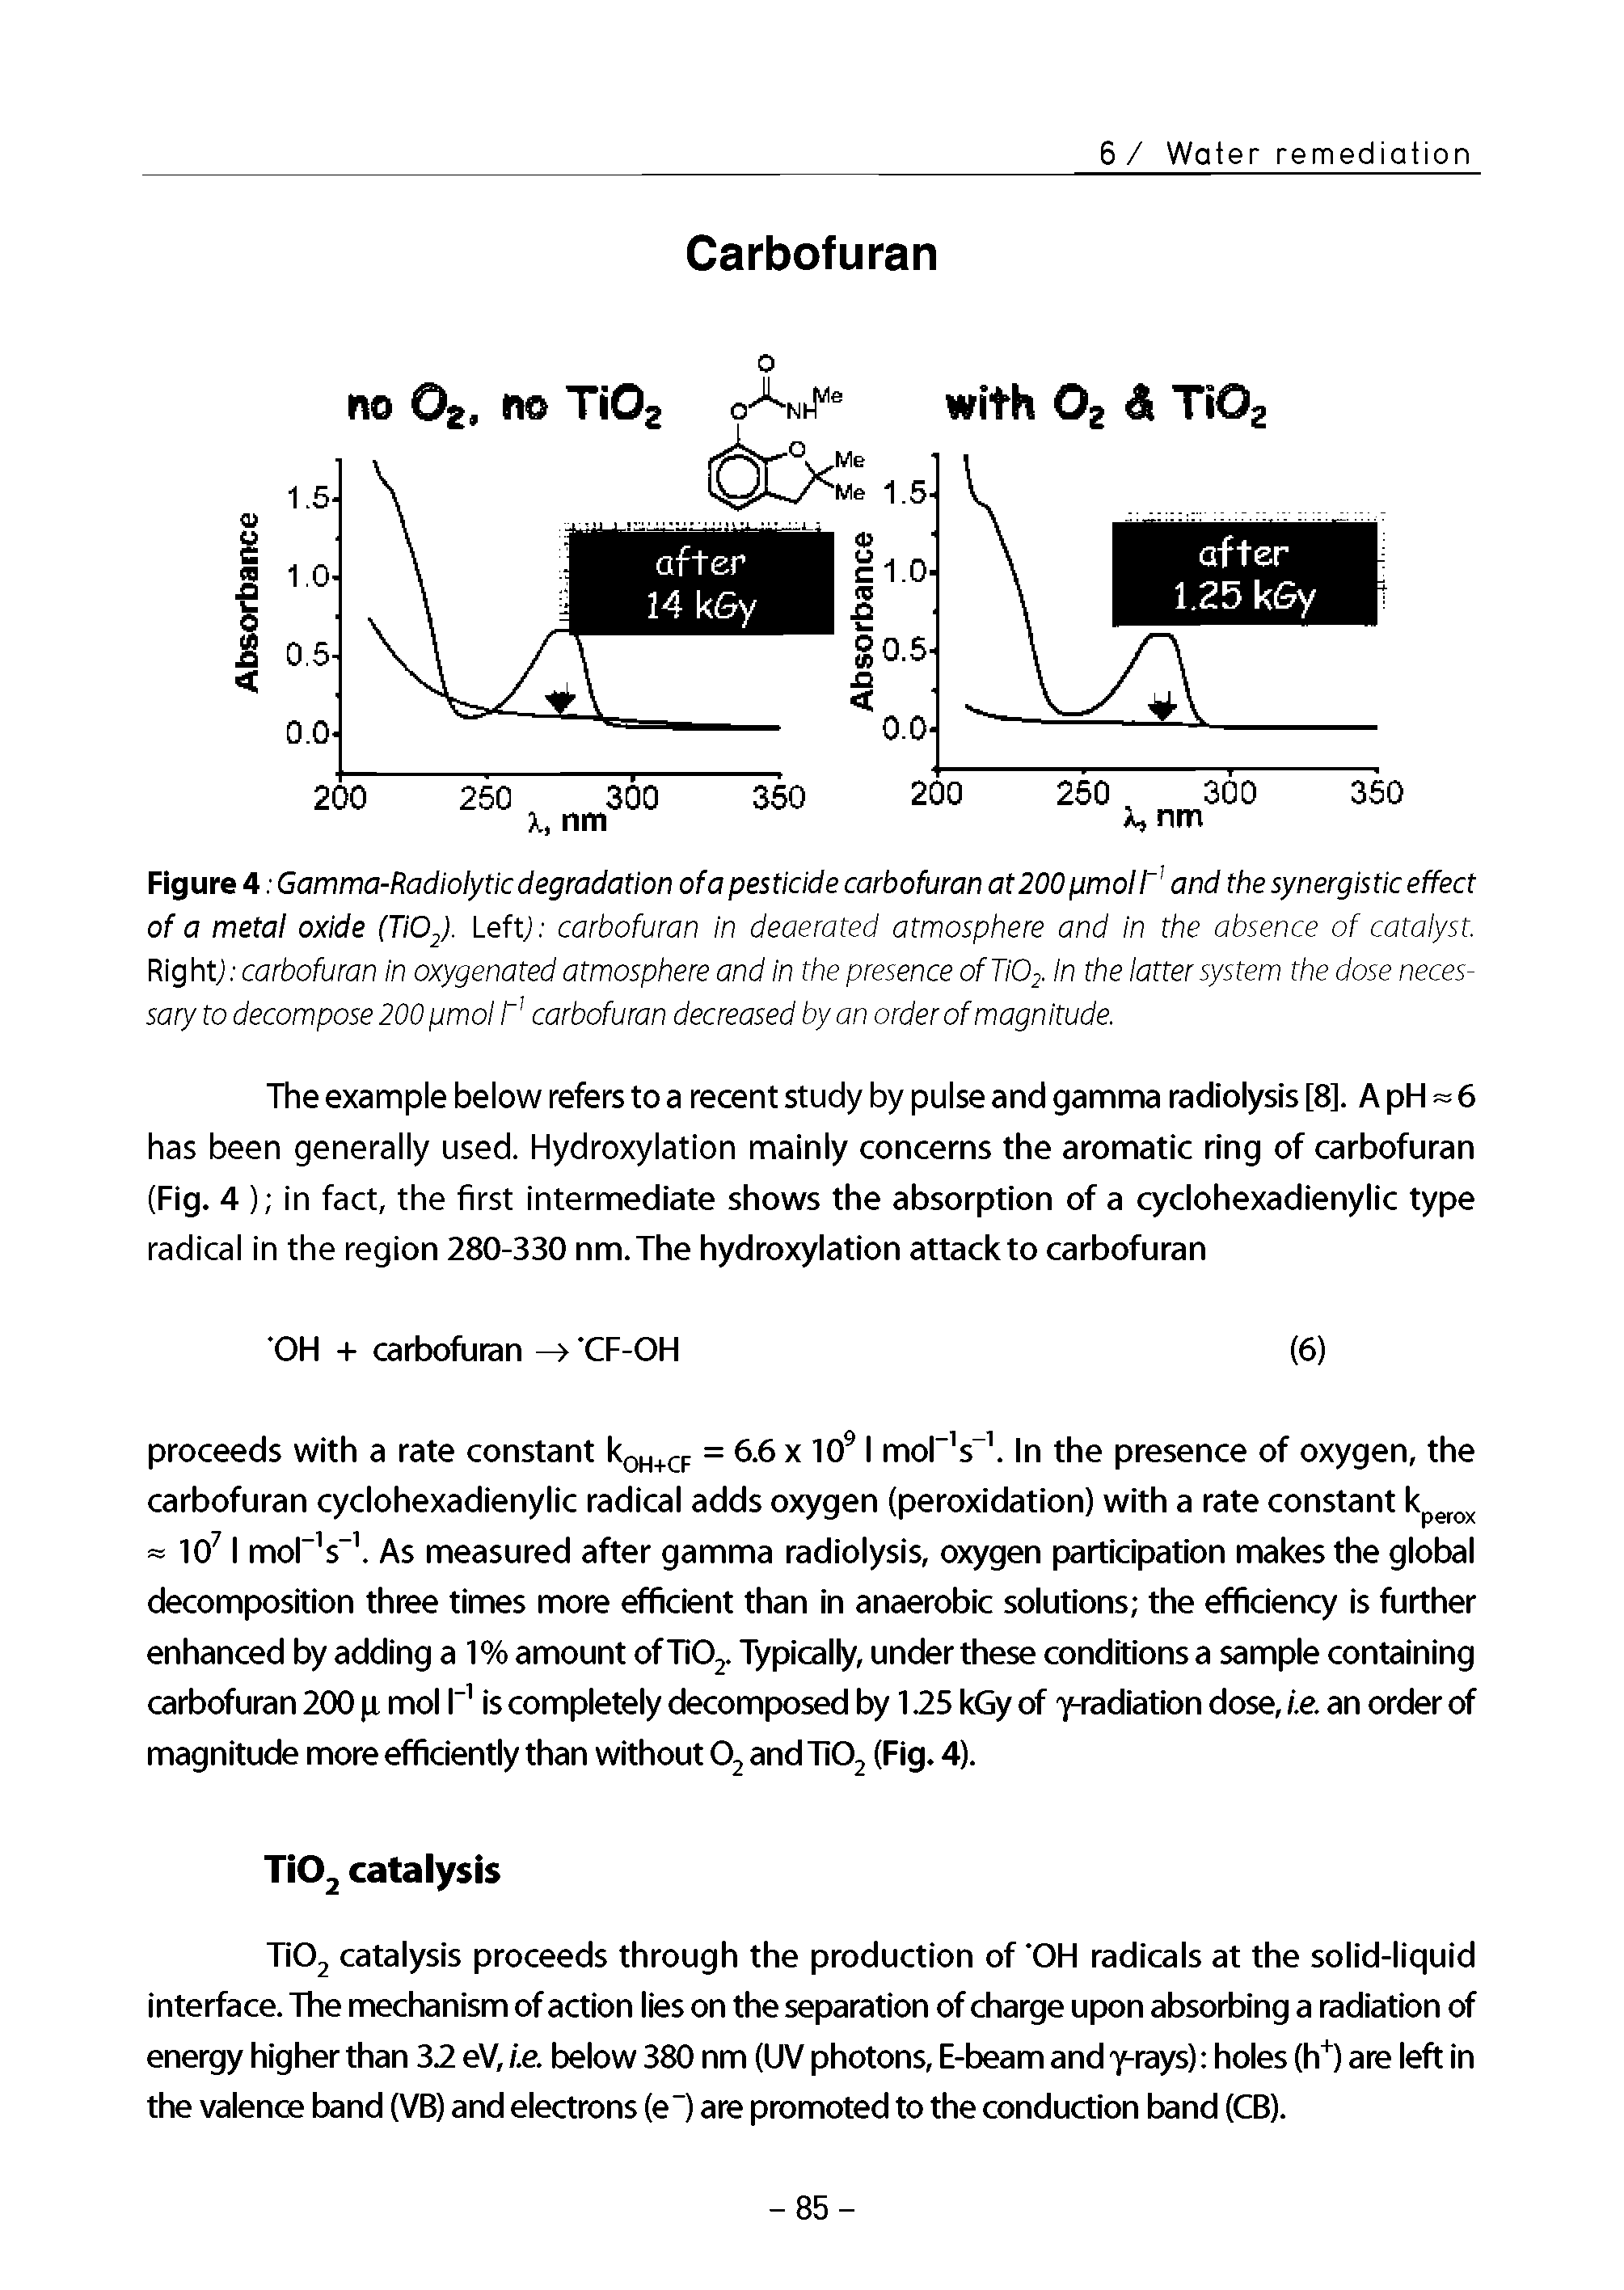 Figure 4 Gamma-Radiolytic degradation ofa pesticide carbofuran at200 pmol T and the synergistic effect ofa metal oxide (TiO ). LeftJ carbofuran in deaerated atmosphere and in the absence of catalyst. Right carbofuran in oxygenated atmosphere and in the presence of 7102- In the latter system the dose necessary to decompose 200 pmol carbofuran decreased by an order of magnitude.